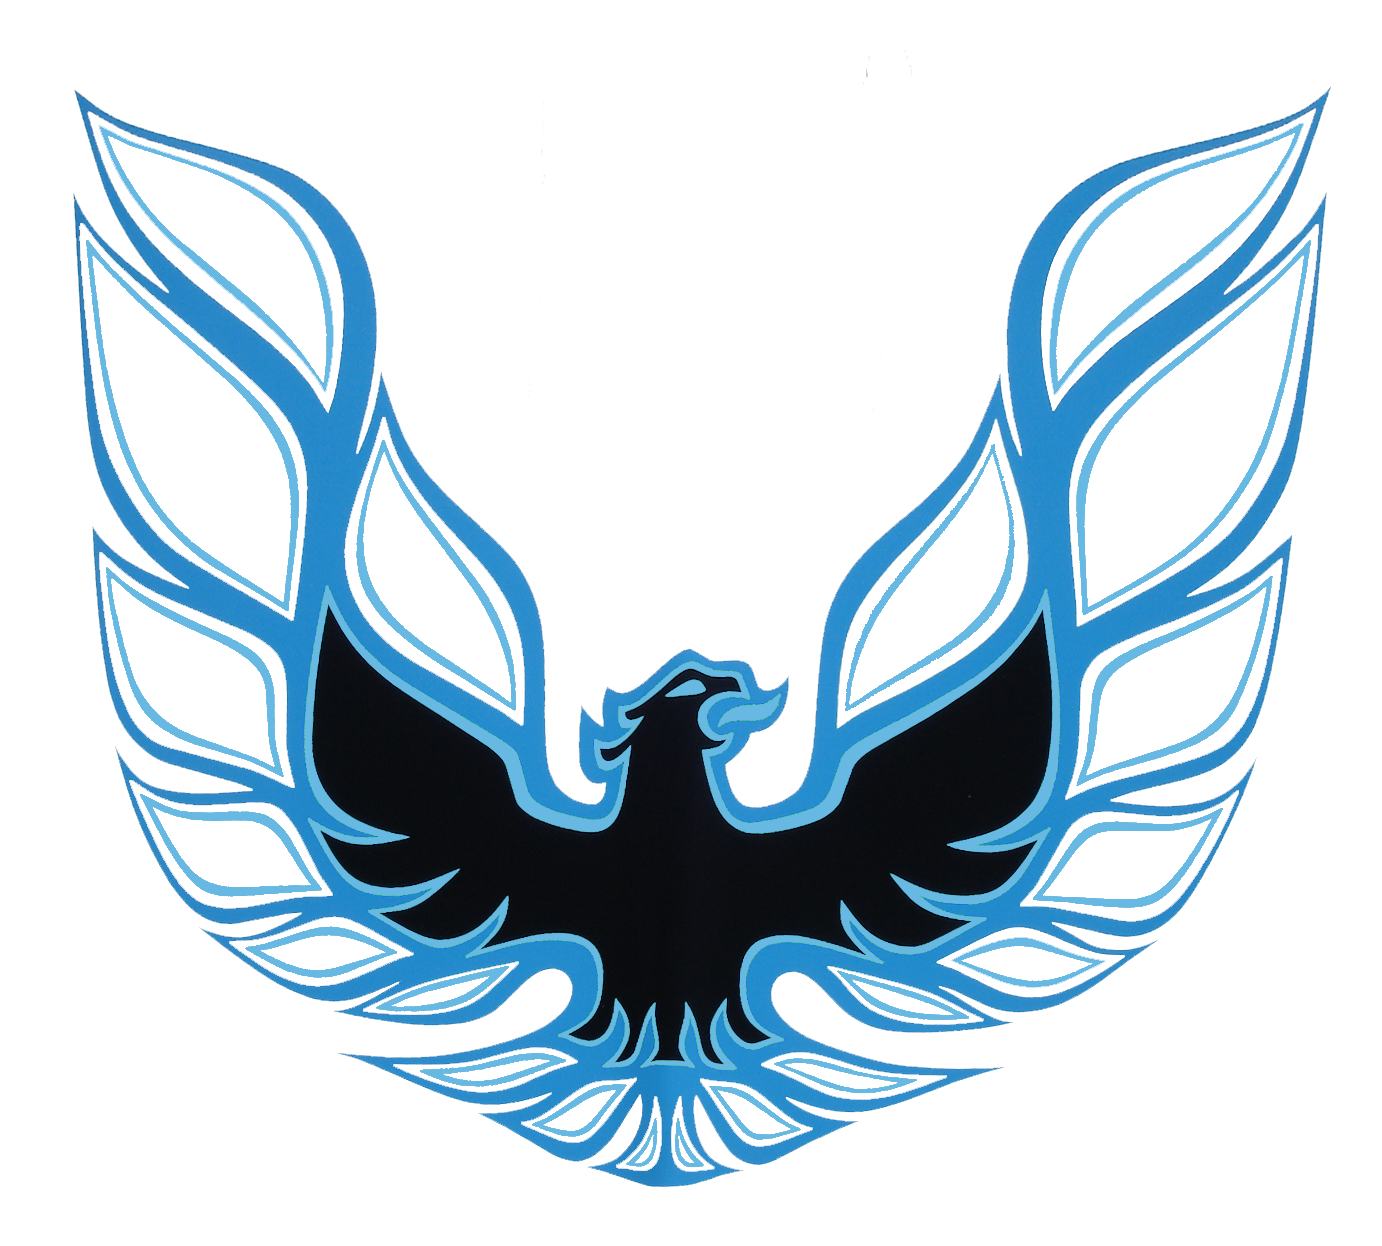 The Blue Trans Am hood bird was introduced in 1973 this decal was used only on White and Blue Trans Ams through 1975